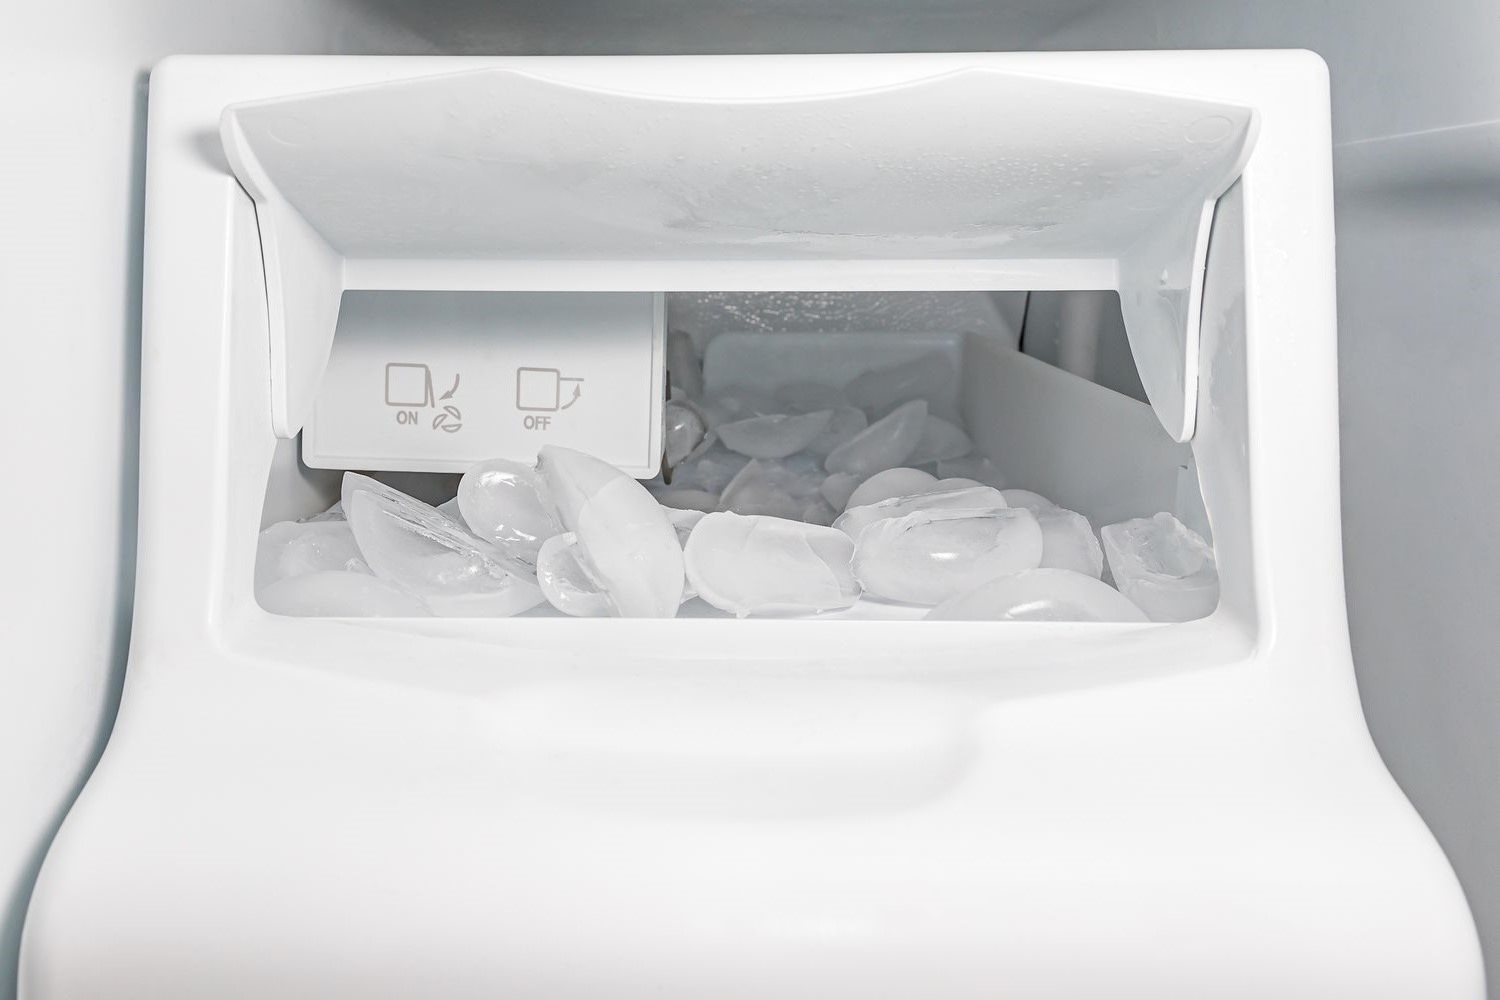 How To Clean Ice Maker